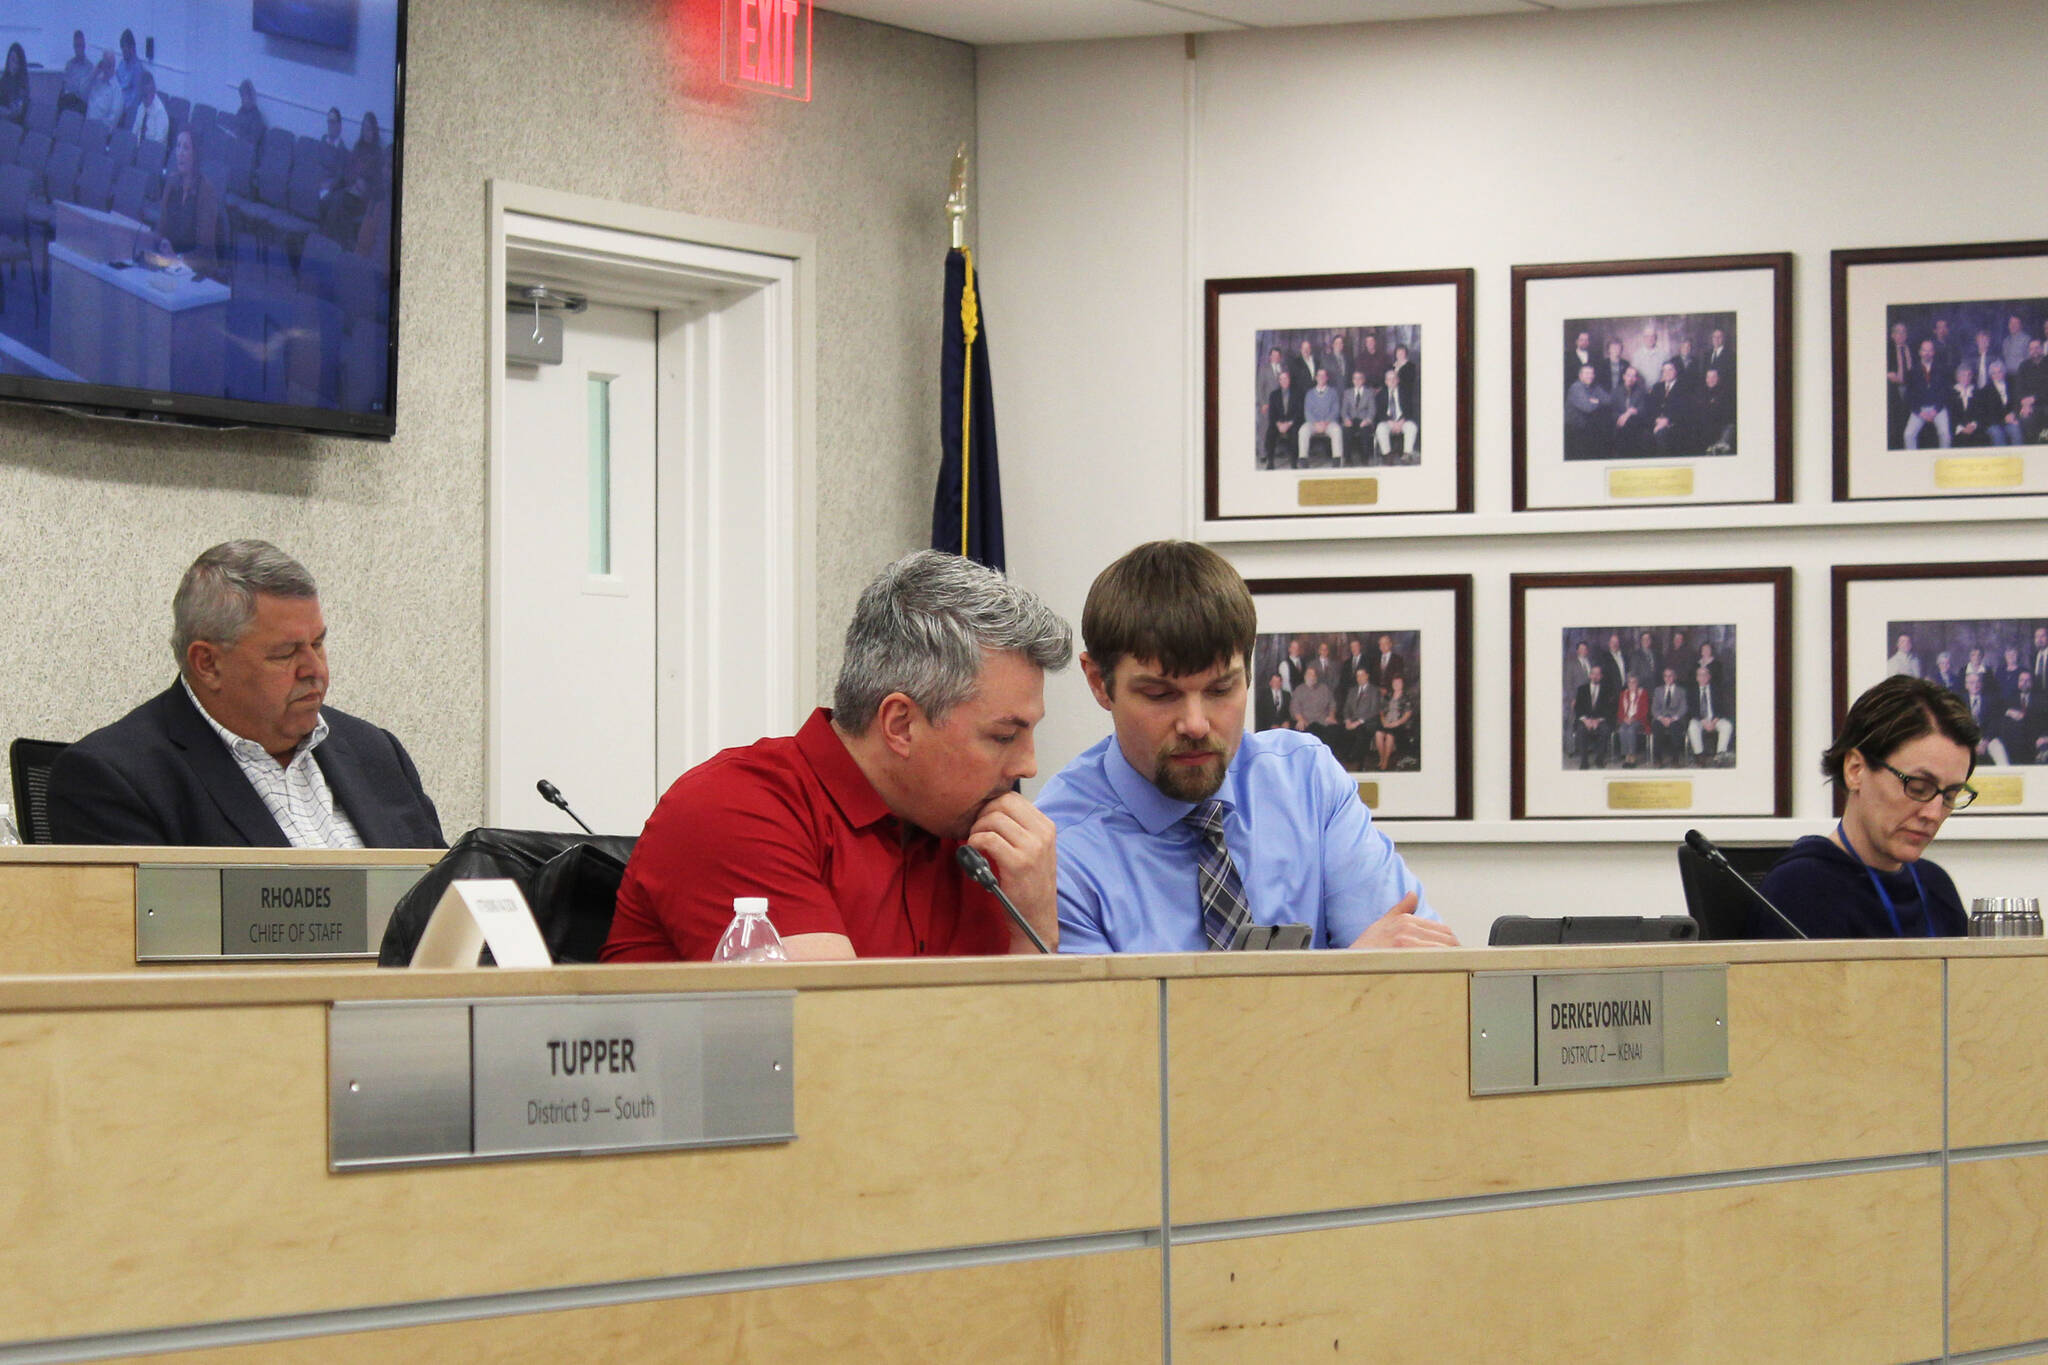 Kenai Peninsula Borough Mayor Charlie Pierce (back) and assembly members Richard Derkevorkian (left) and Jesse Bjorkman (right) particpate in a meeting of the Kenai Peninsula Borough Assembly on Tuesday in Soldotna. (Photo by Ashlyn O’Hara/Peninsula Clarion)